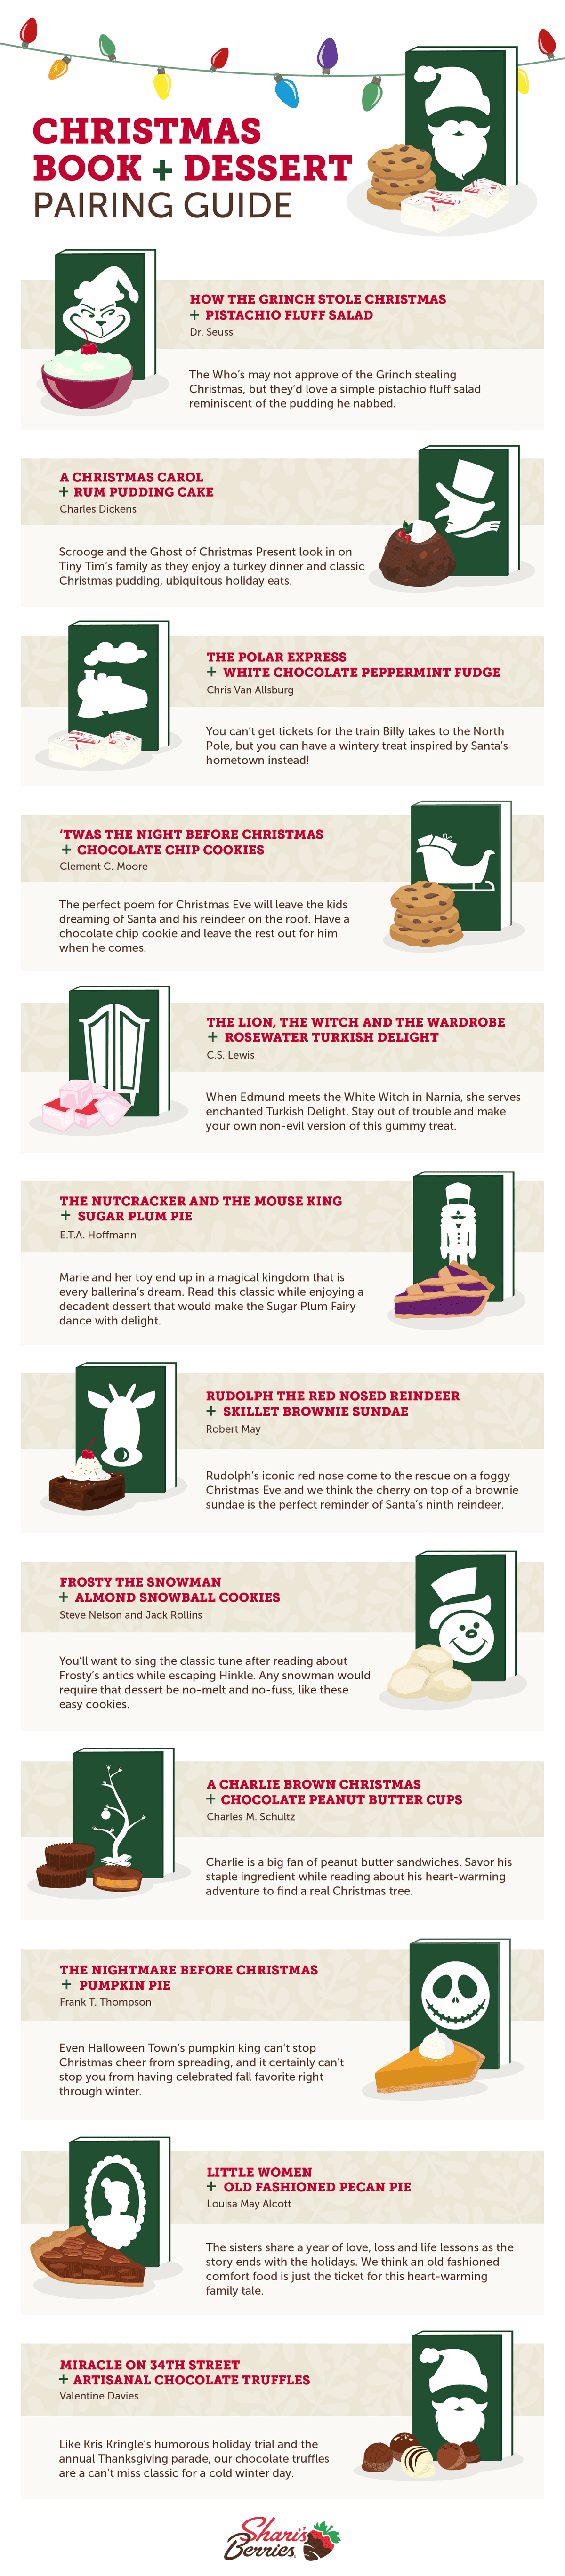 Christmas desserts and book pairing guide infographic.